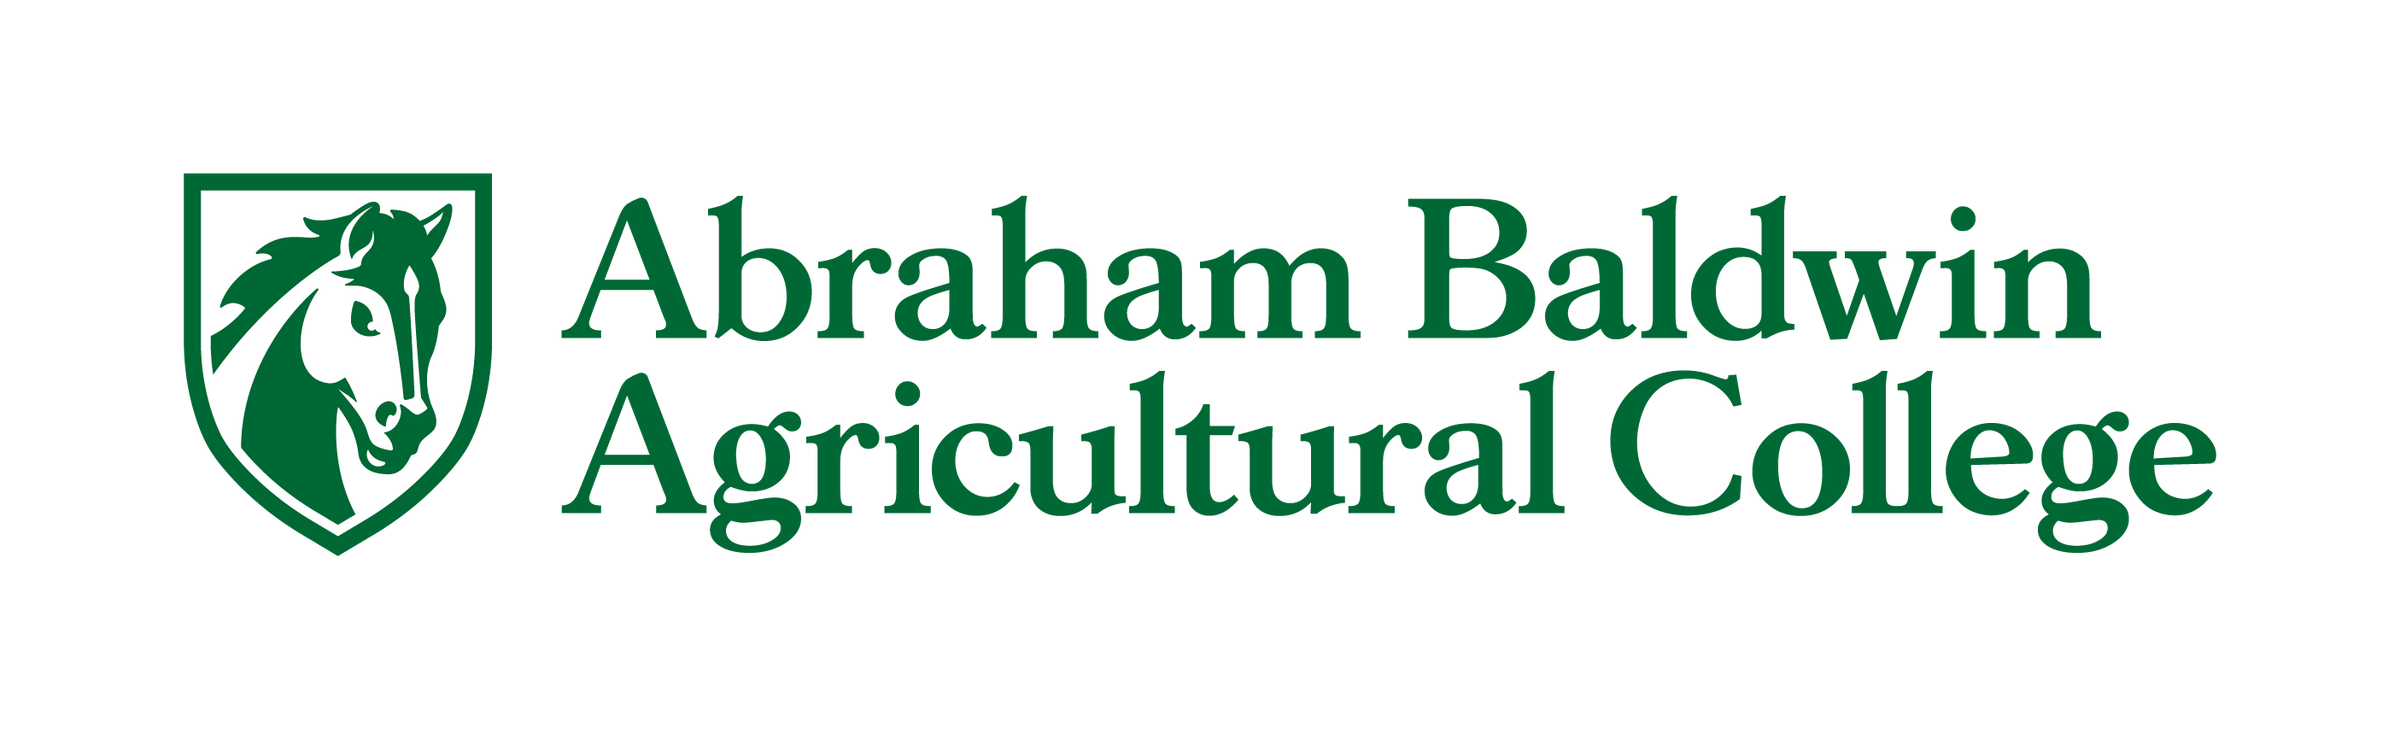 Go to Abraham Baldwin Agricultural College